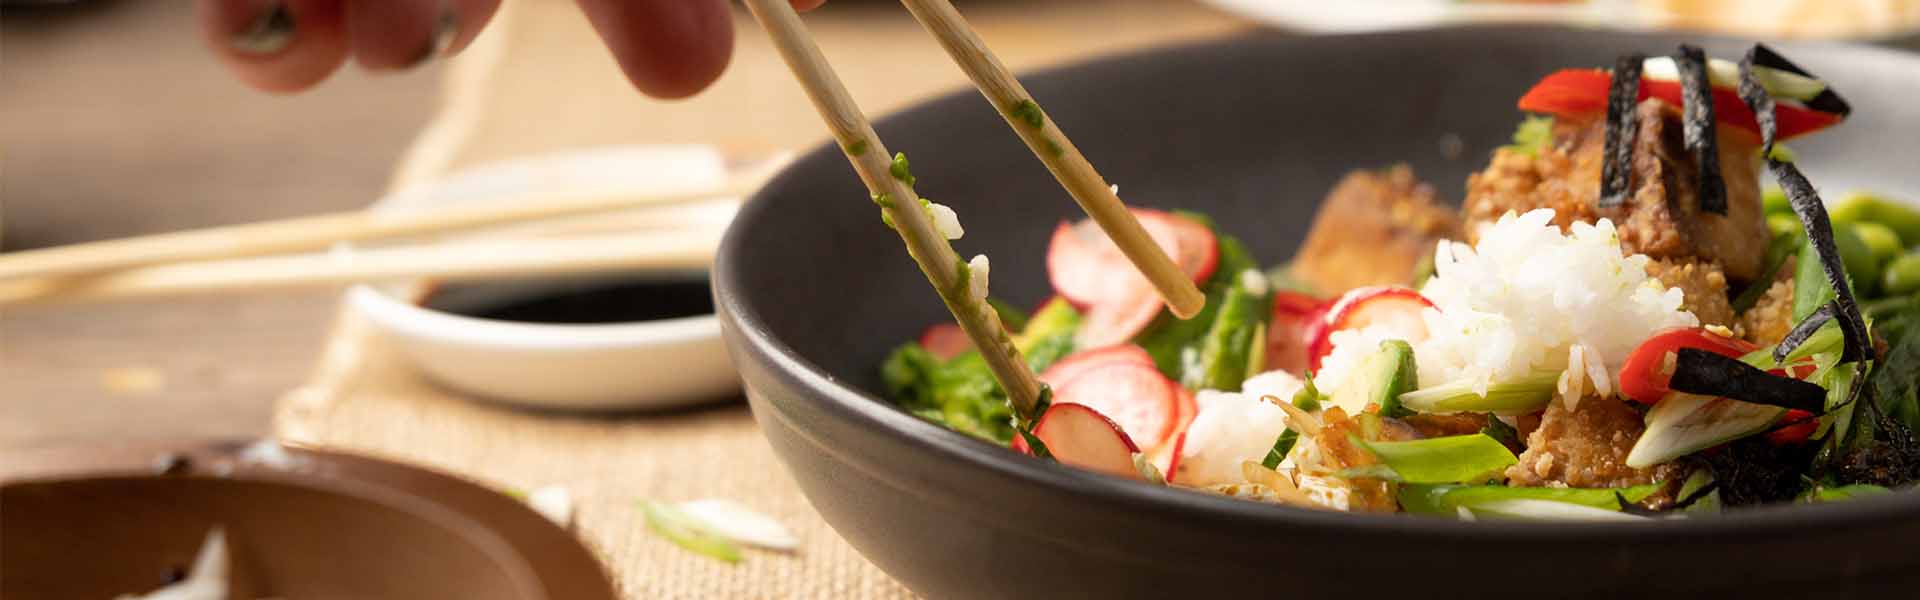 Pan-Asian meal in a dish with chopsticks